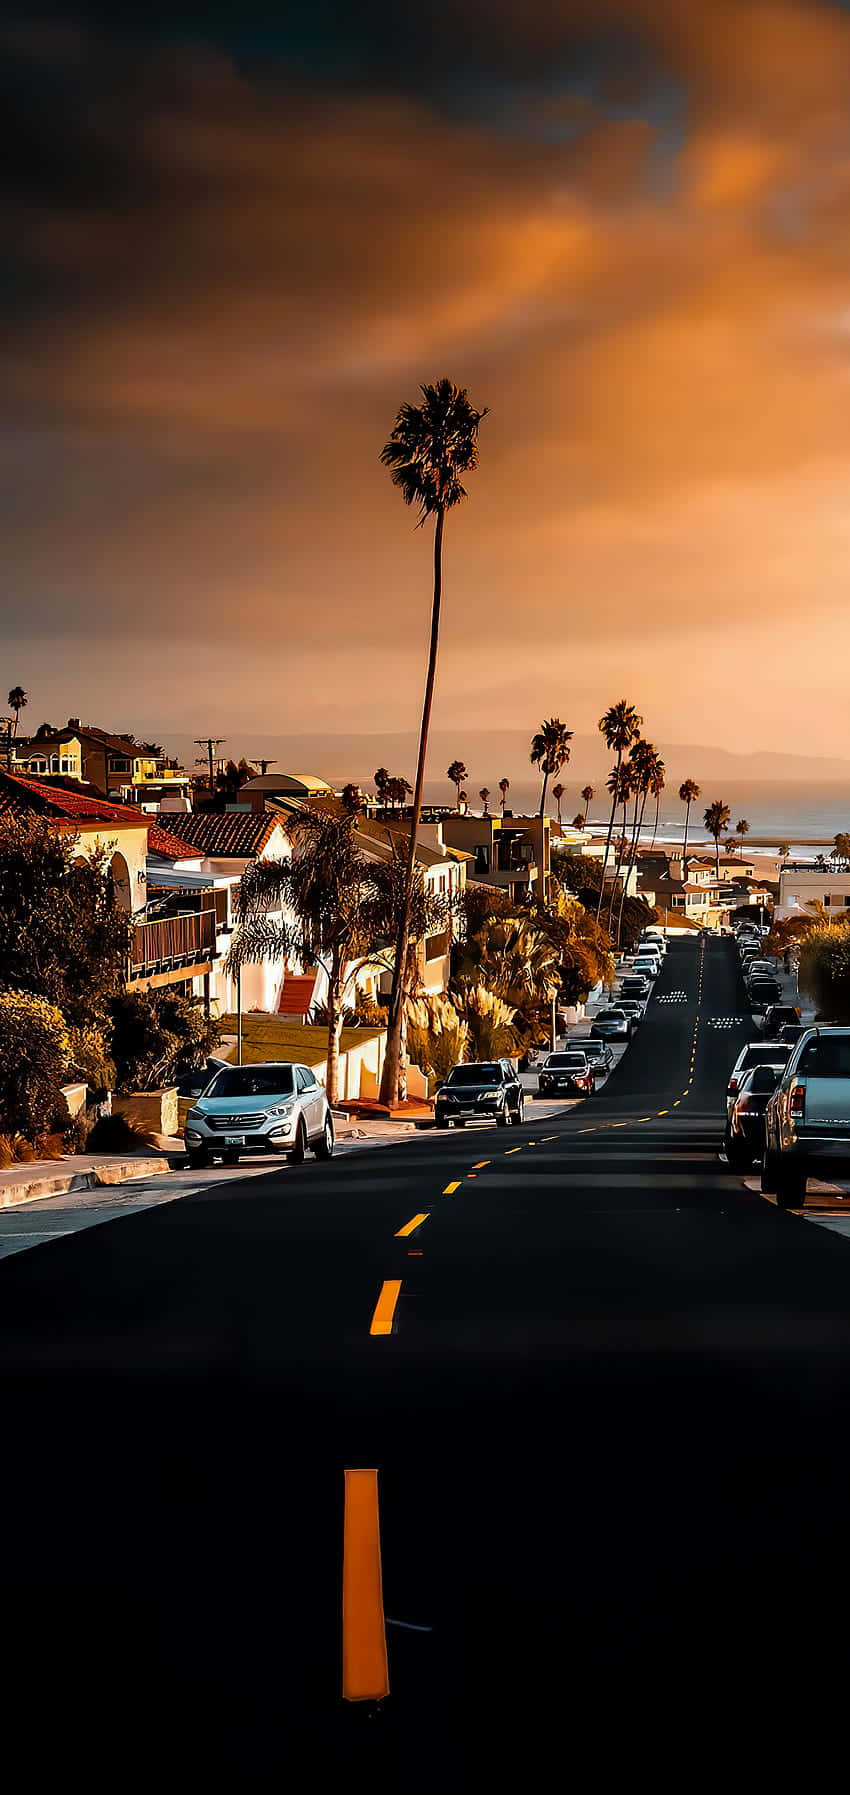 A Street With Palm Trees And Cars At Sunset Wallpaper